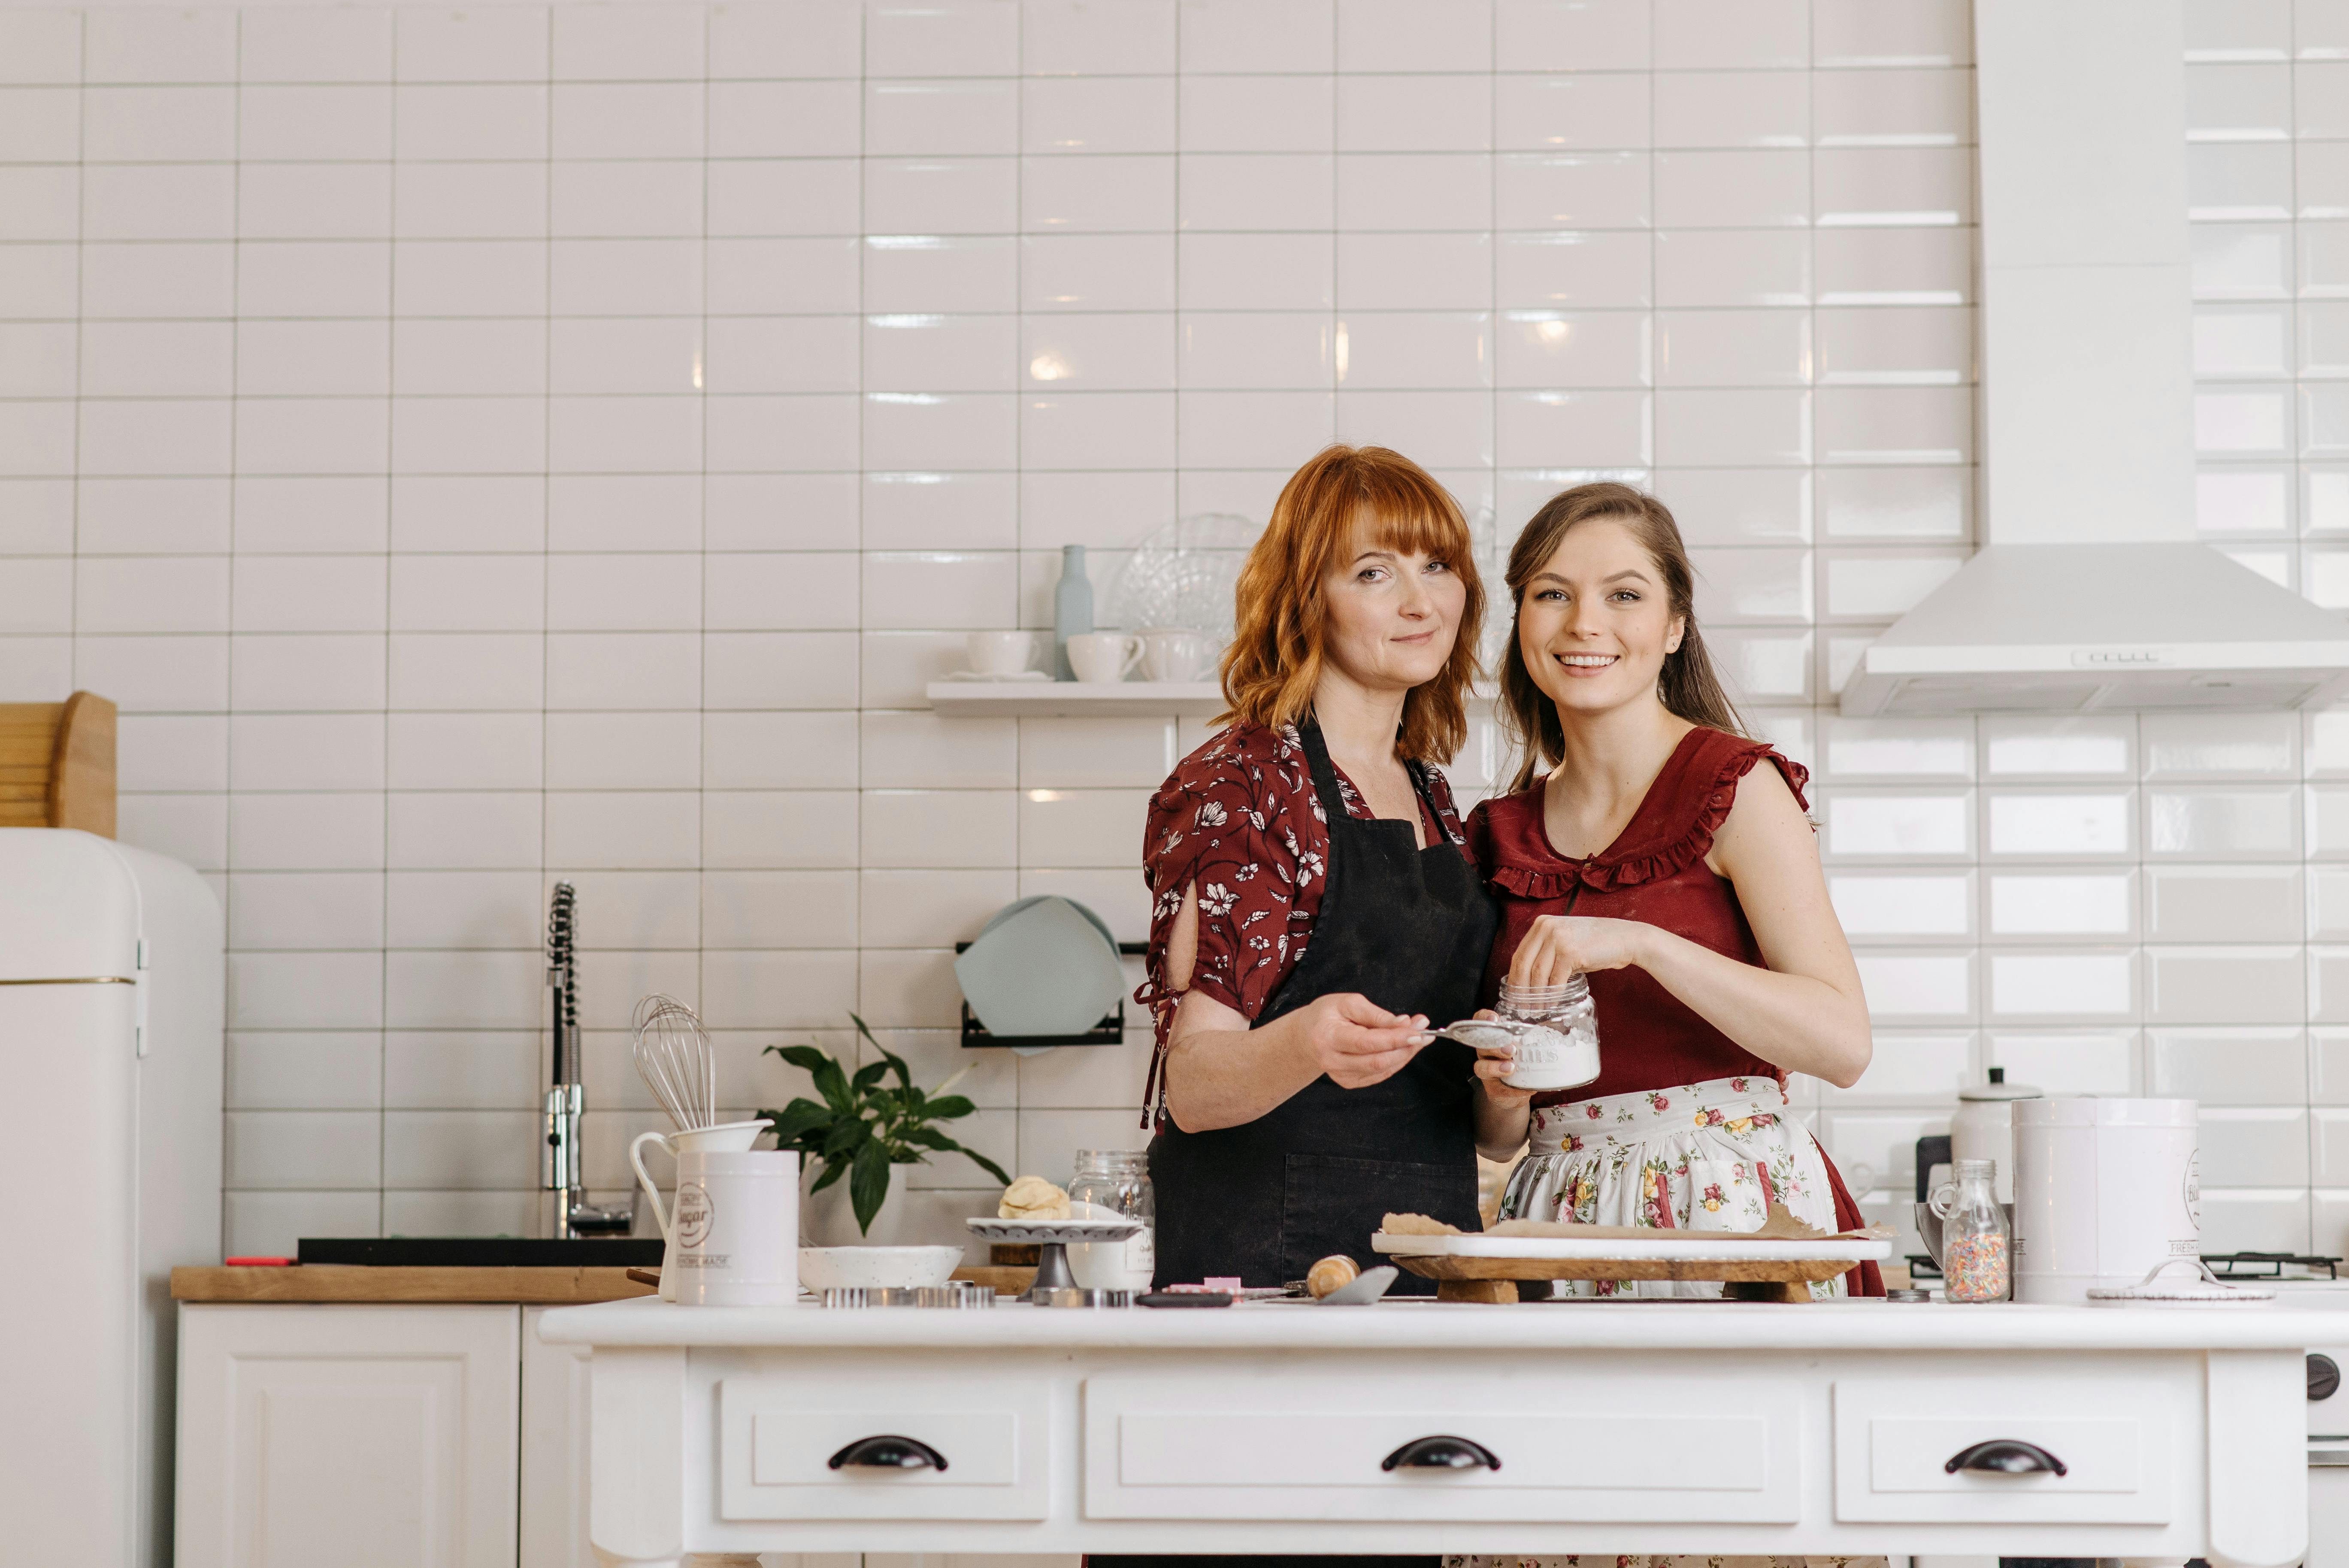 Two women in the kitchen | Source: Pexels